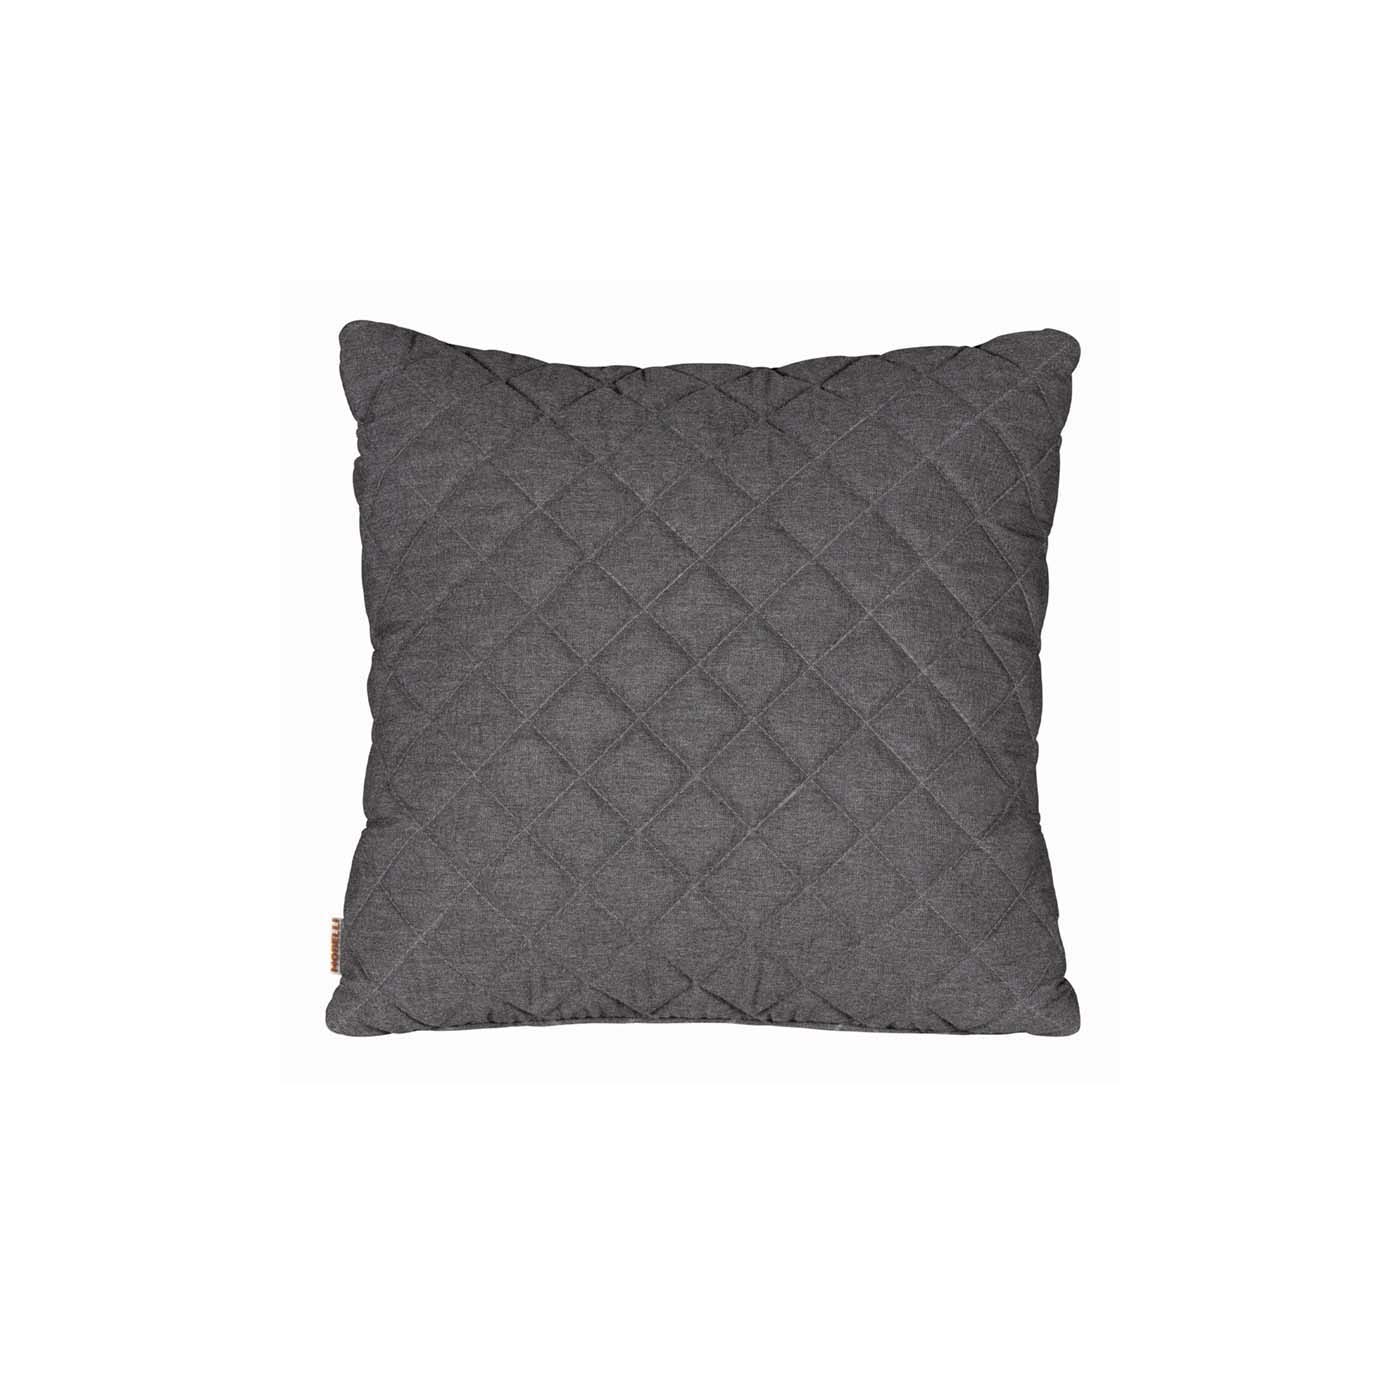 Square Outdoor Scatter Cushion - Charcoal for Sale at Mobelli